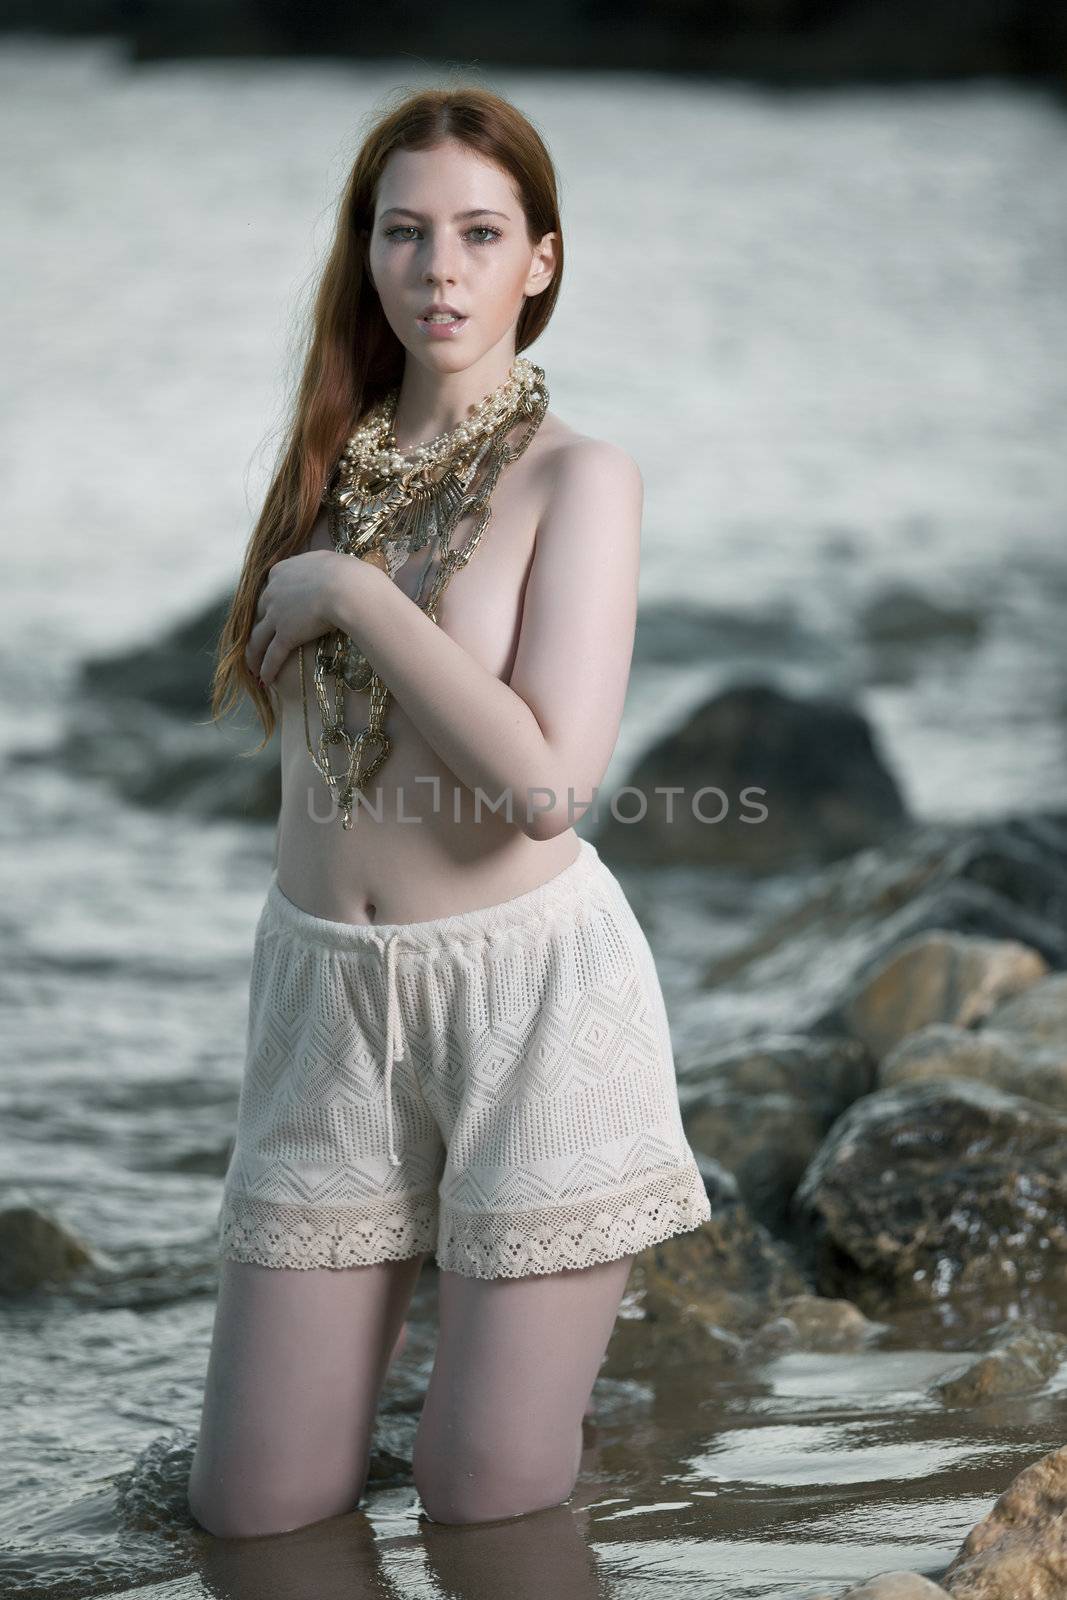 A beautiful woman with pale skin and red hair kneeling on a beach posing semi nude